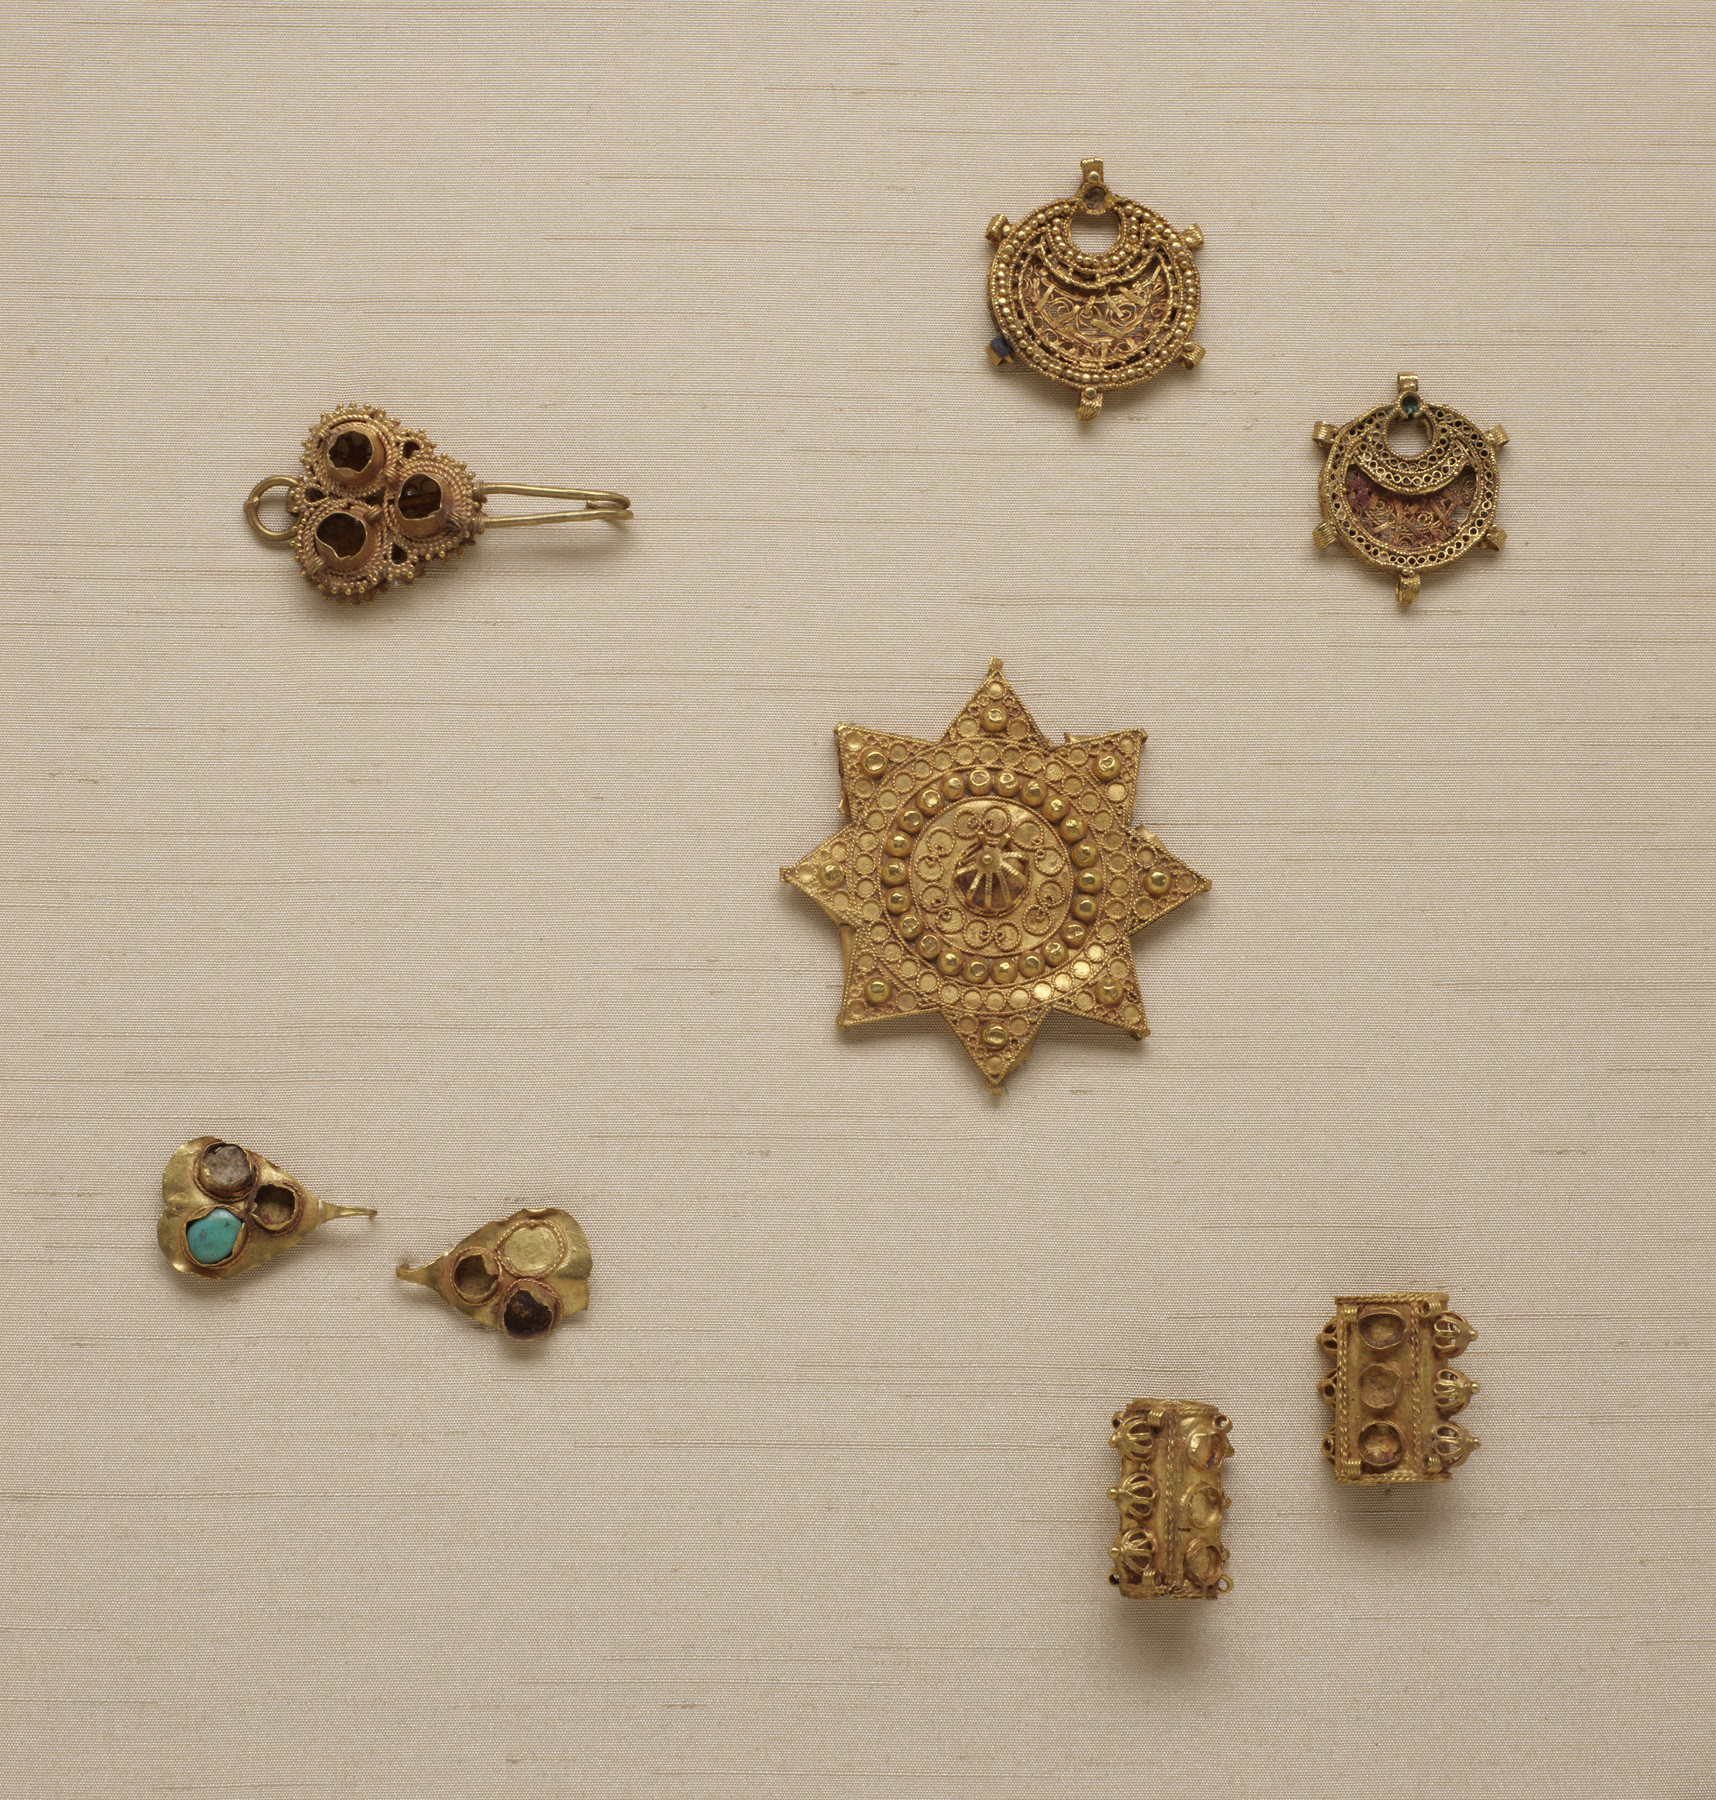 Gold Jewelry Elements | The Walters Art Museum